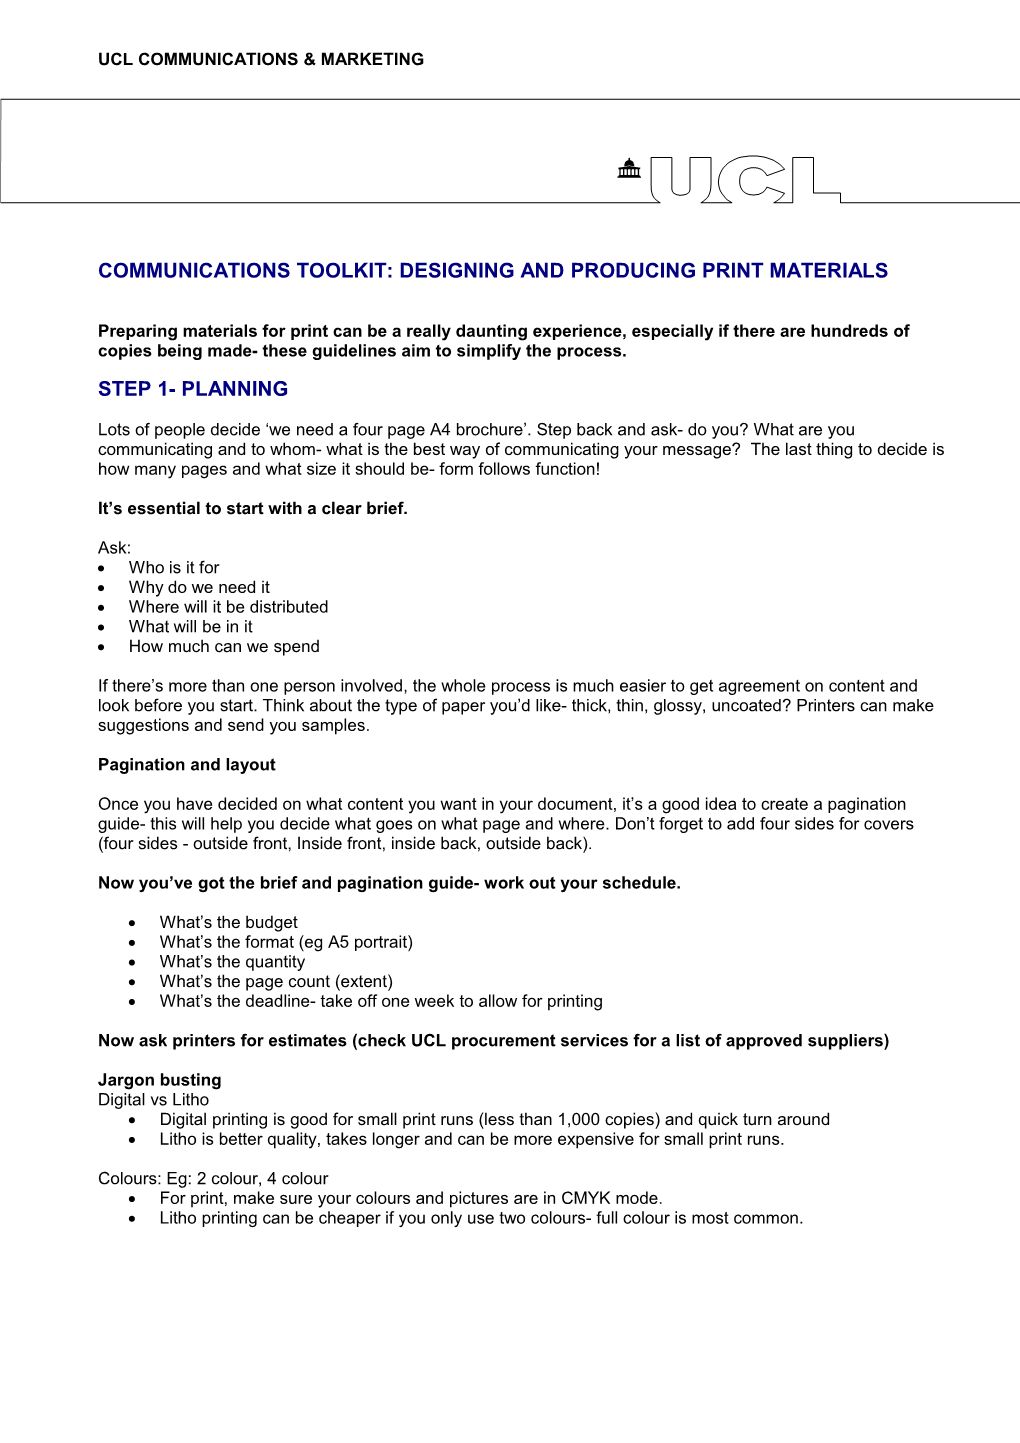 Communications Toolkit: Designing and Producing Print Materials